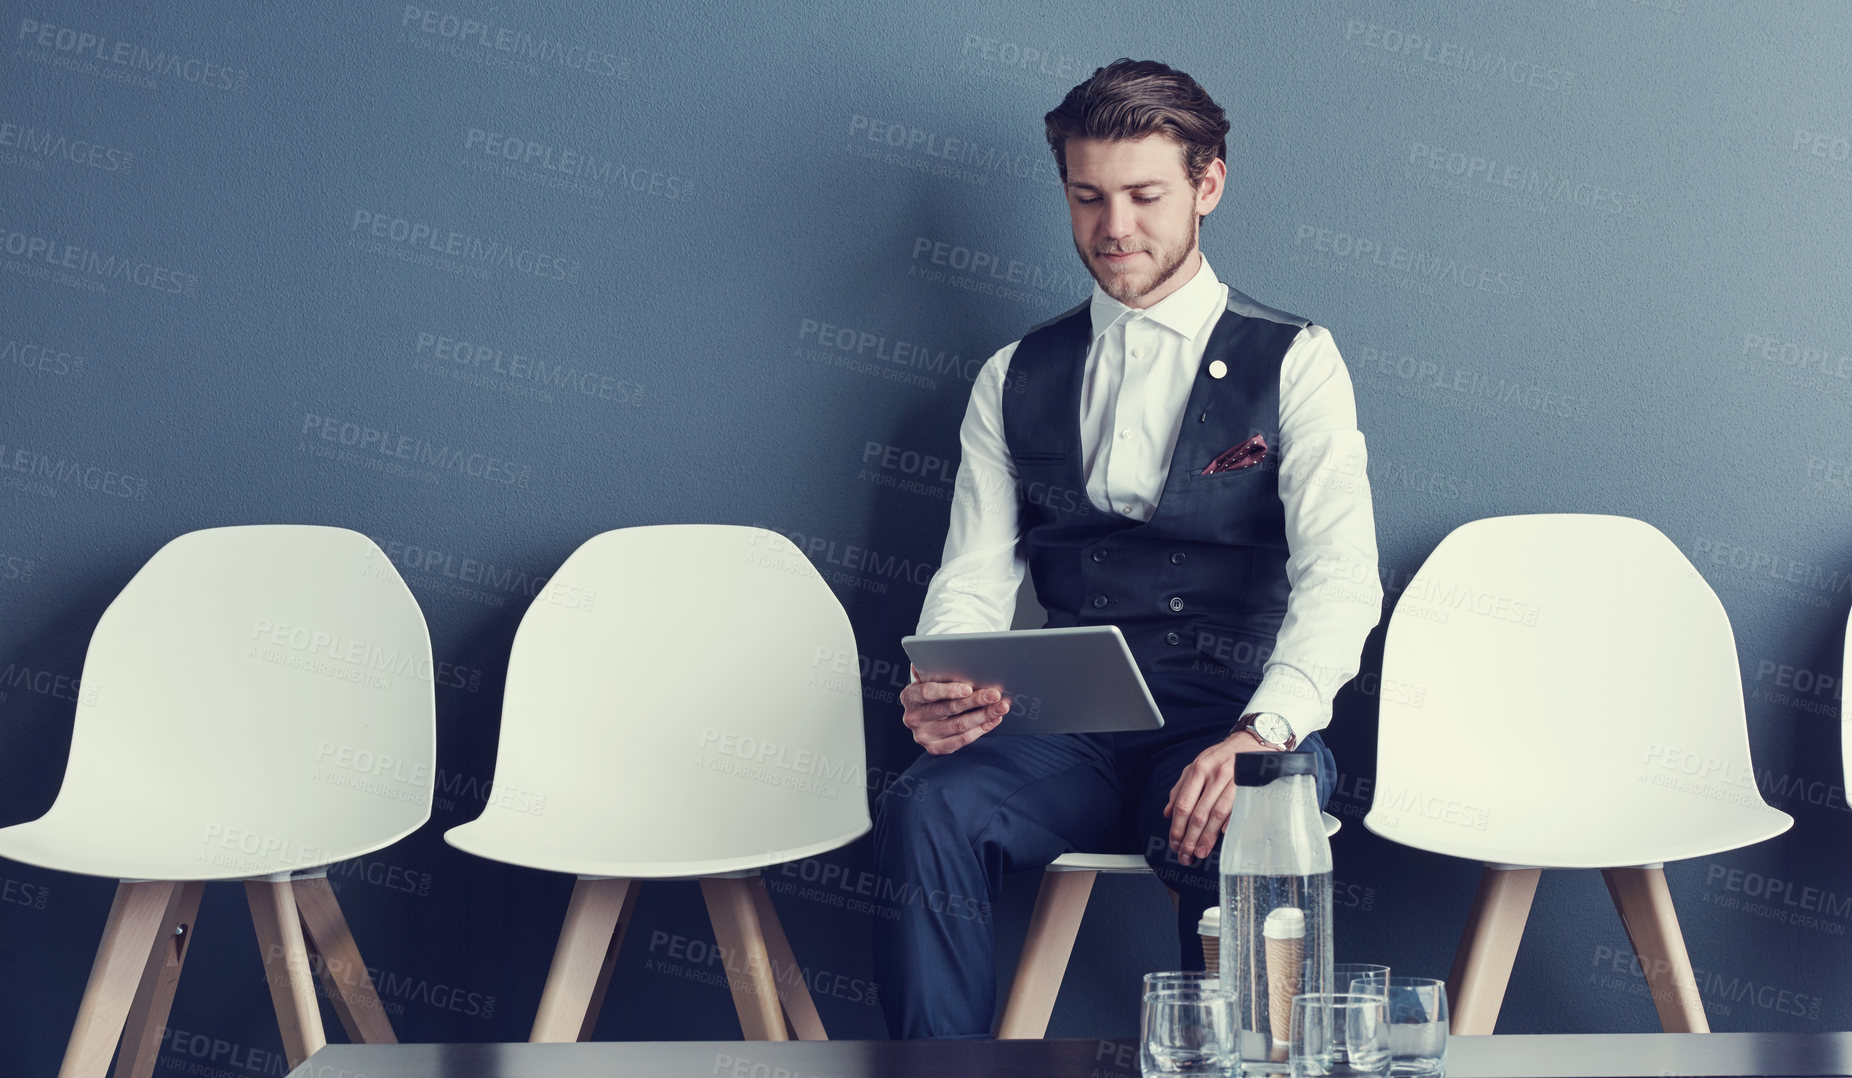 Buy stock photo Shot of a young businessman using a tablet while waiting for an interview